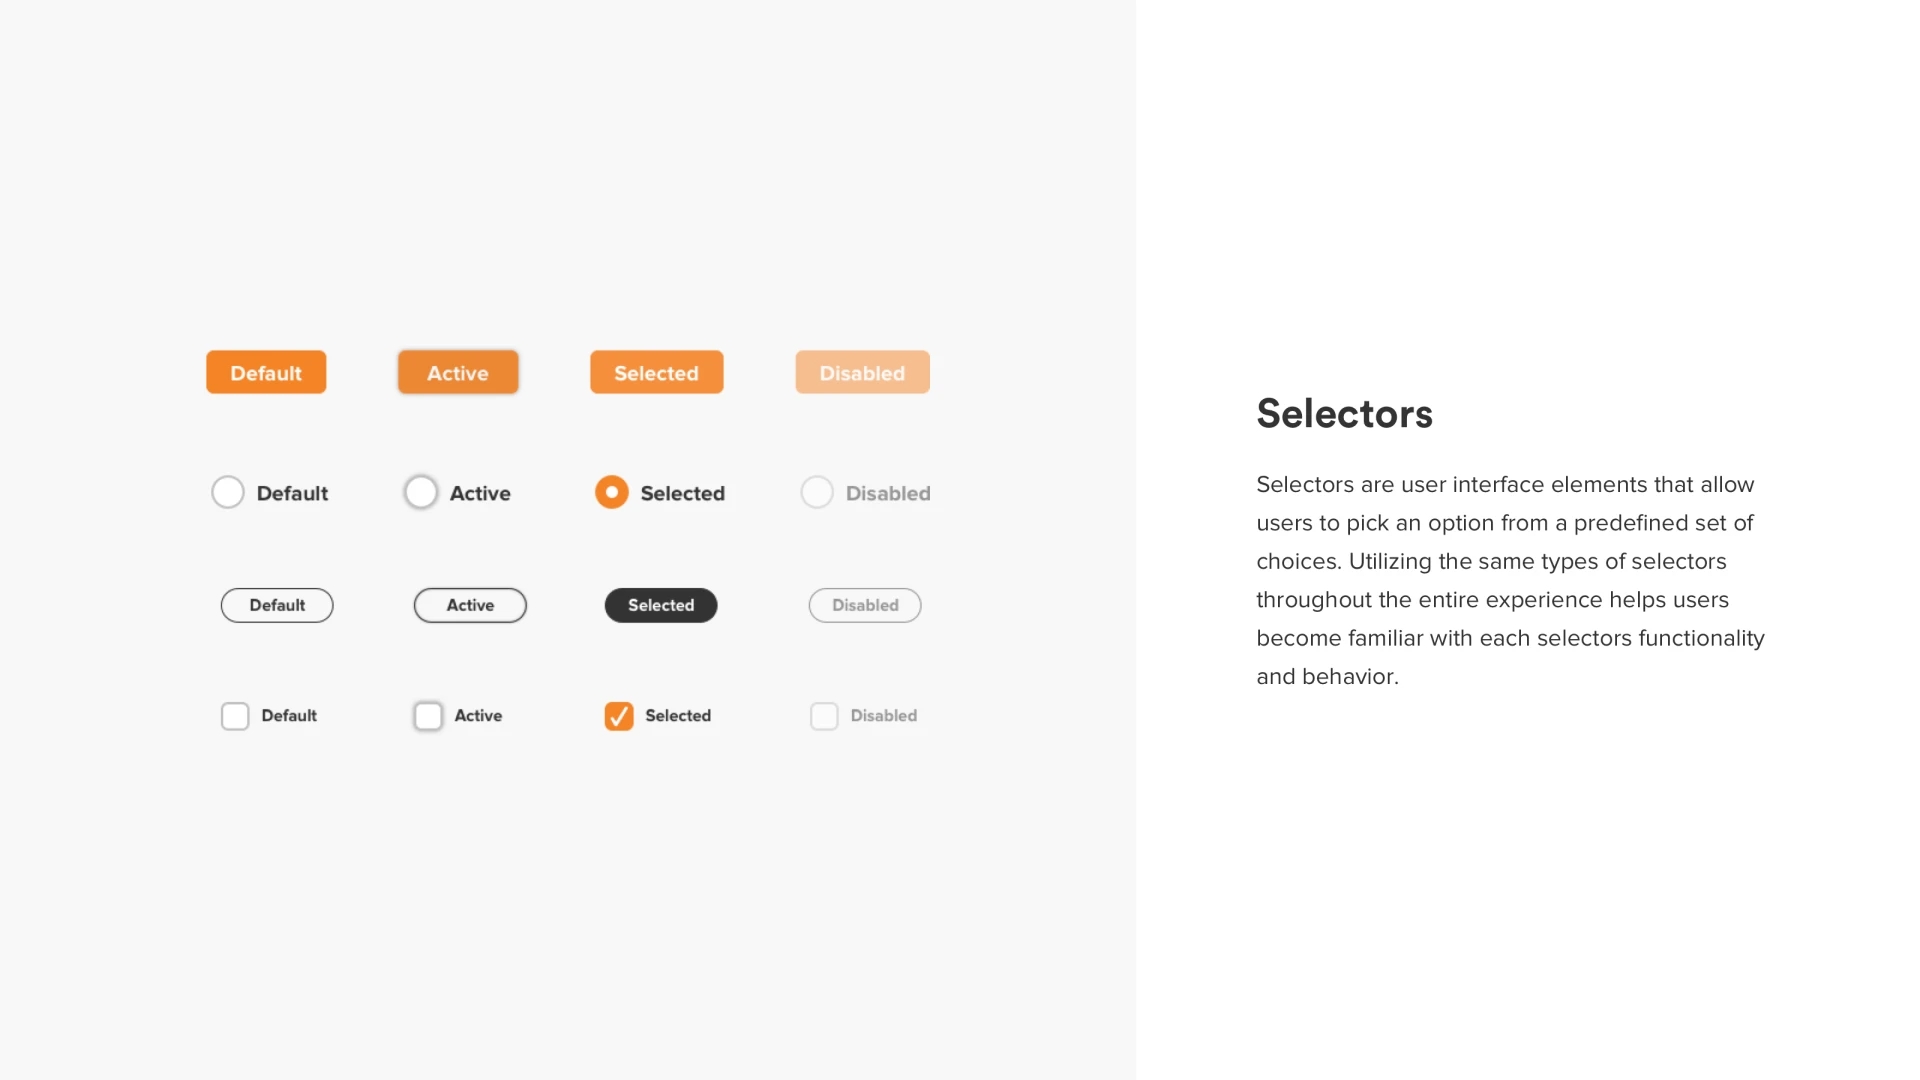 image shows buttons and other selectors with the following text - Selectors are user interface elements that allow users to pick an option from a predefined set of choices. Utilizing the same types of selectors throughout the entire experience helps users become familiar with each selectors functionality and behavior